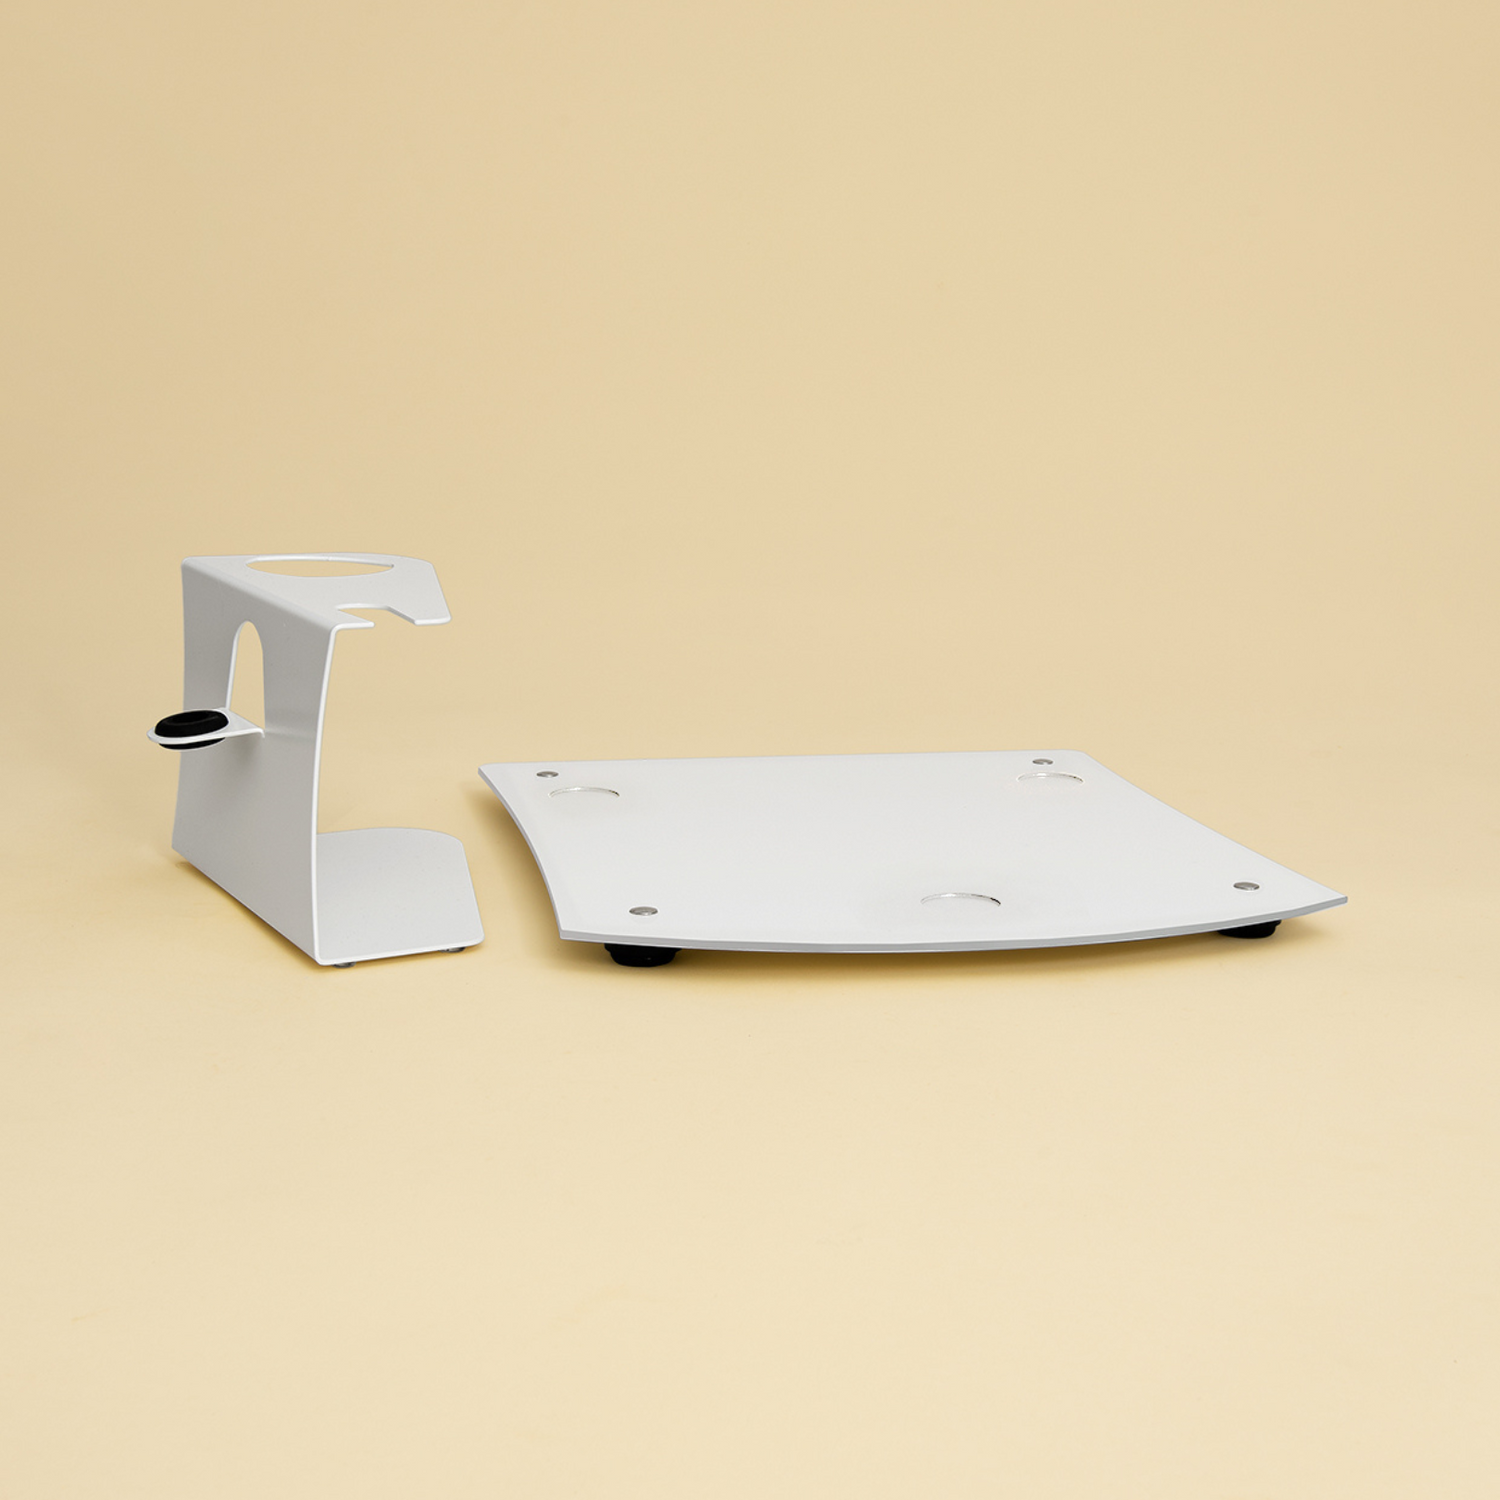 Sliding board + accessory holder suitable for the Thermomix TM5 in pearl white